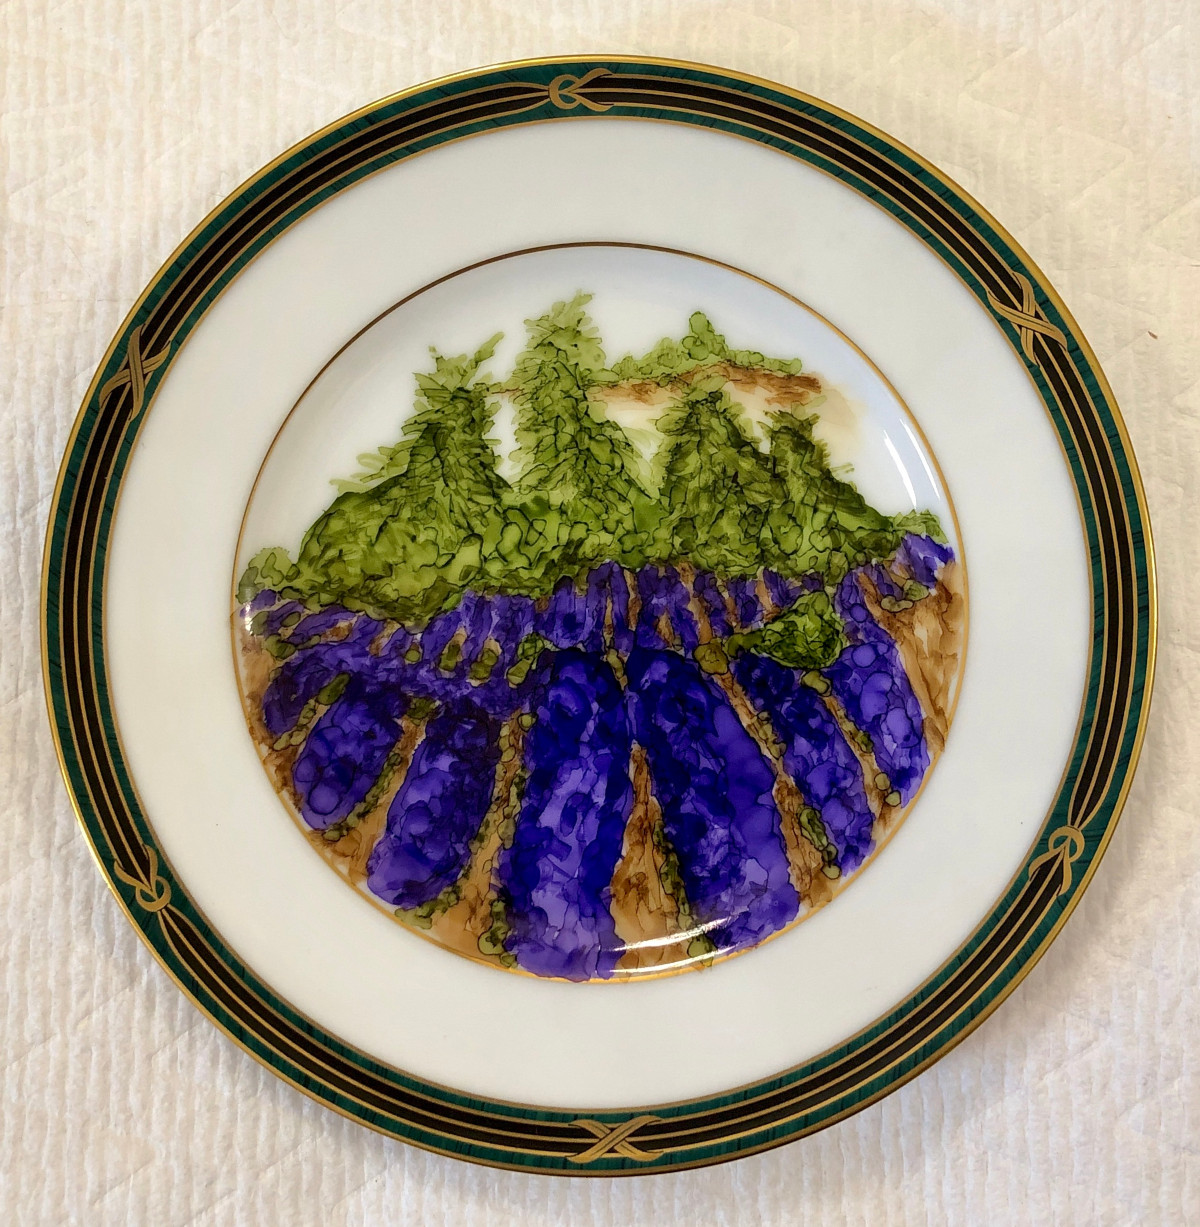 China Plate with Lavender Field